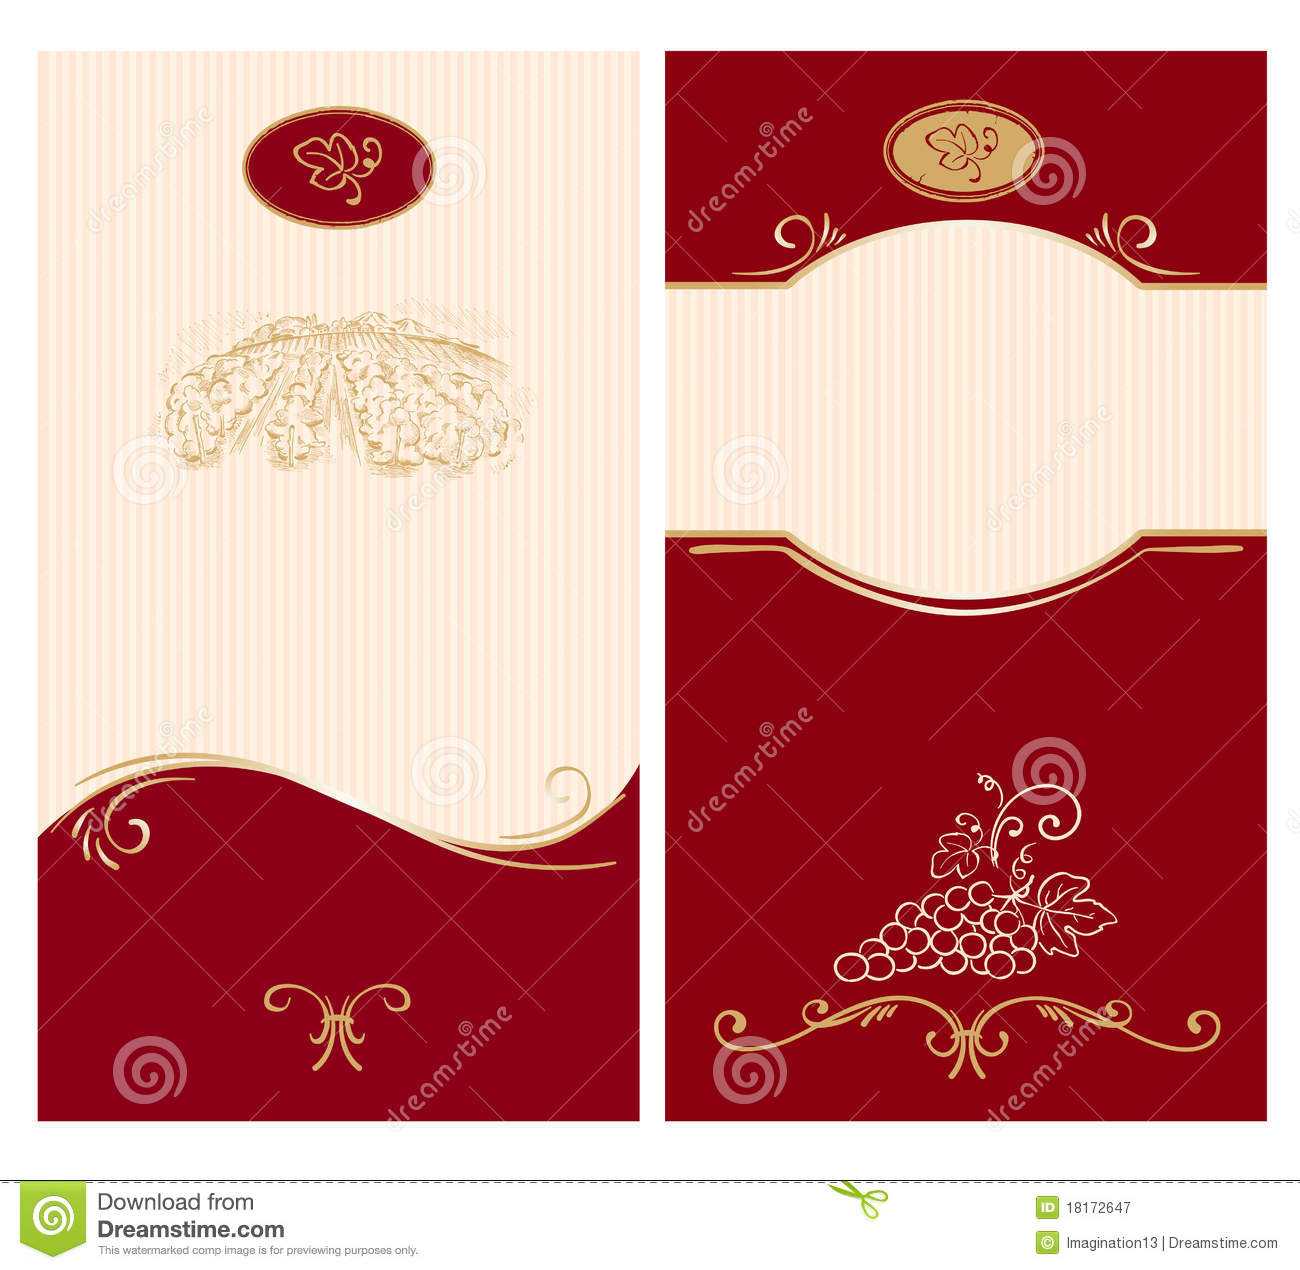 Template For Wine Labels Stock Vector. Illustration Of Intended For Blank Wine Label Template